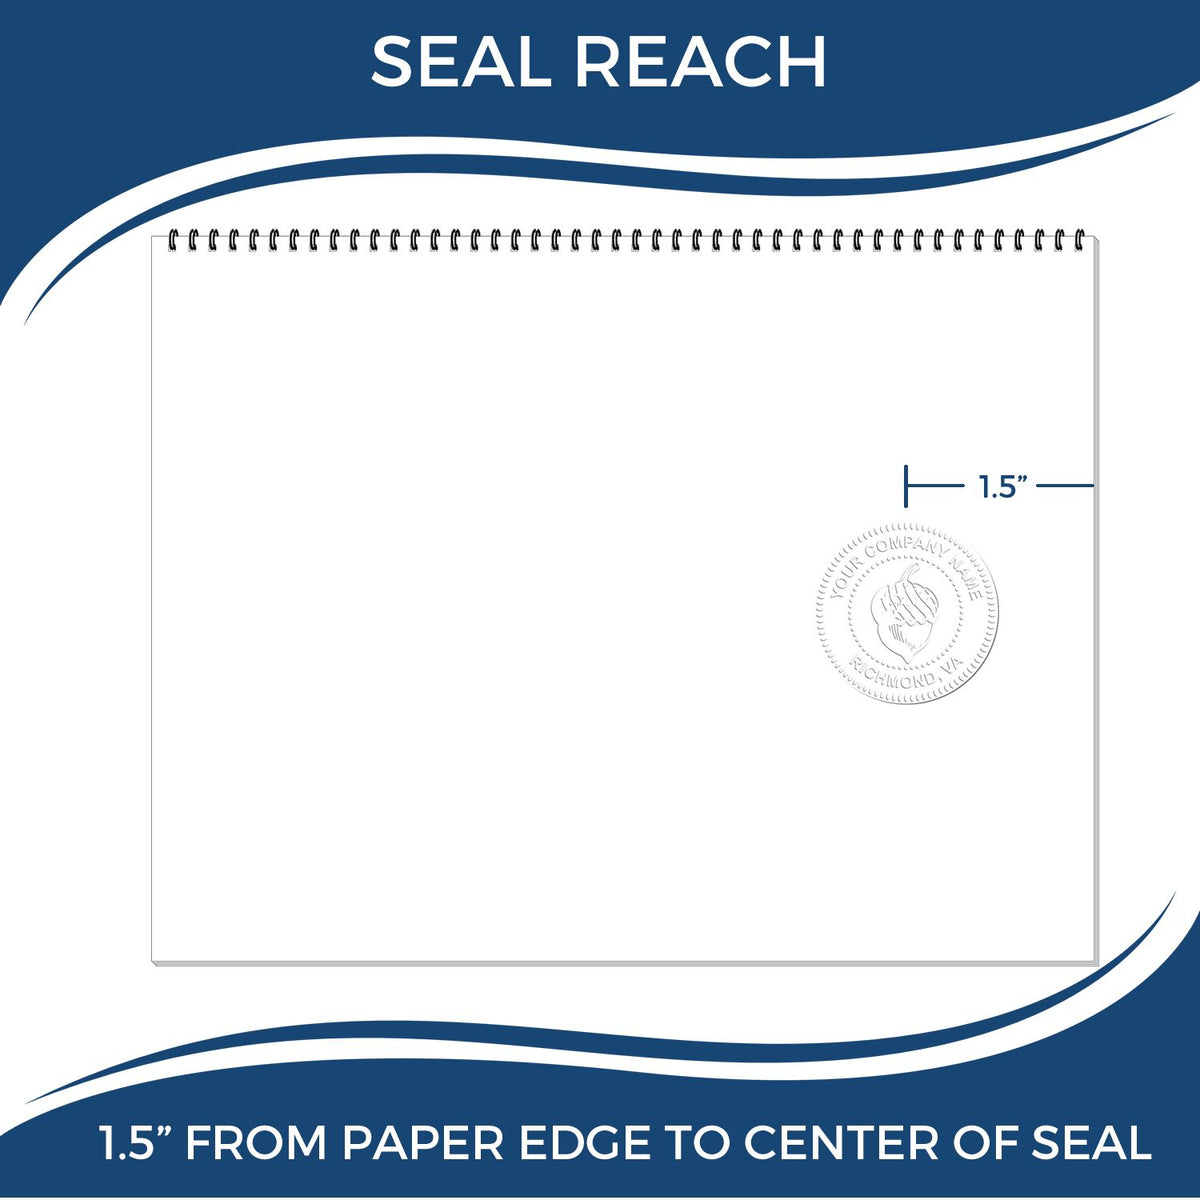 An infographic showing the seal reach which is represented by a ruler and a miniature seal image of the Guam Desk Architect Embossing Seal